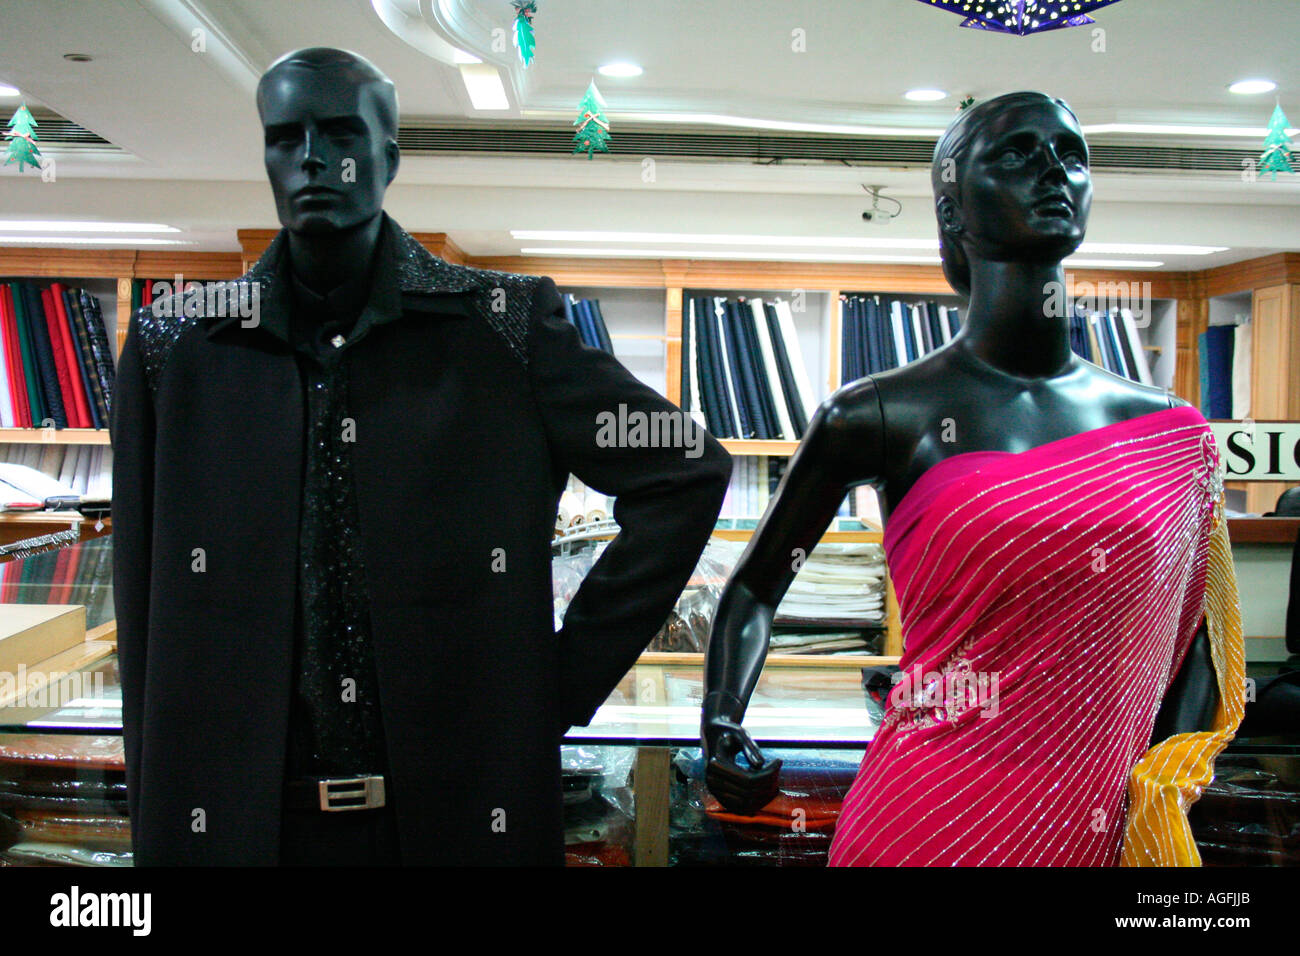 Male and female mannequins dressed up in party wear in a shopping mall in Kerala, India Stock Photo